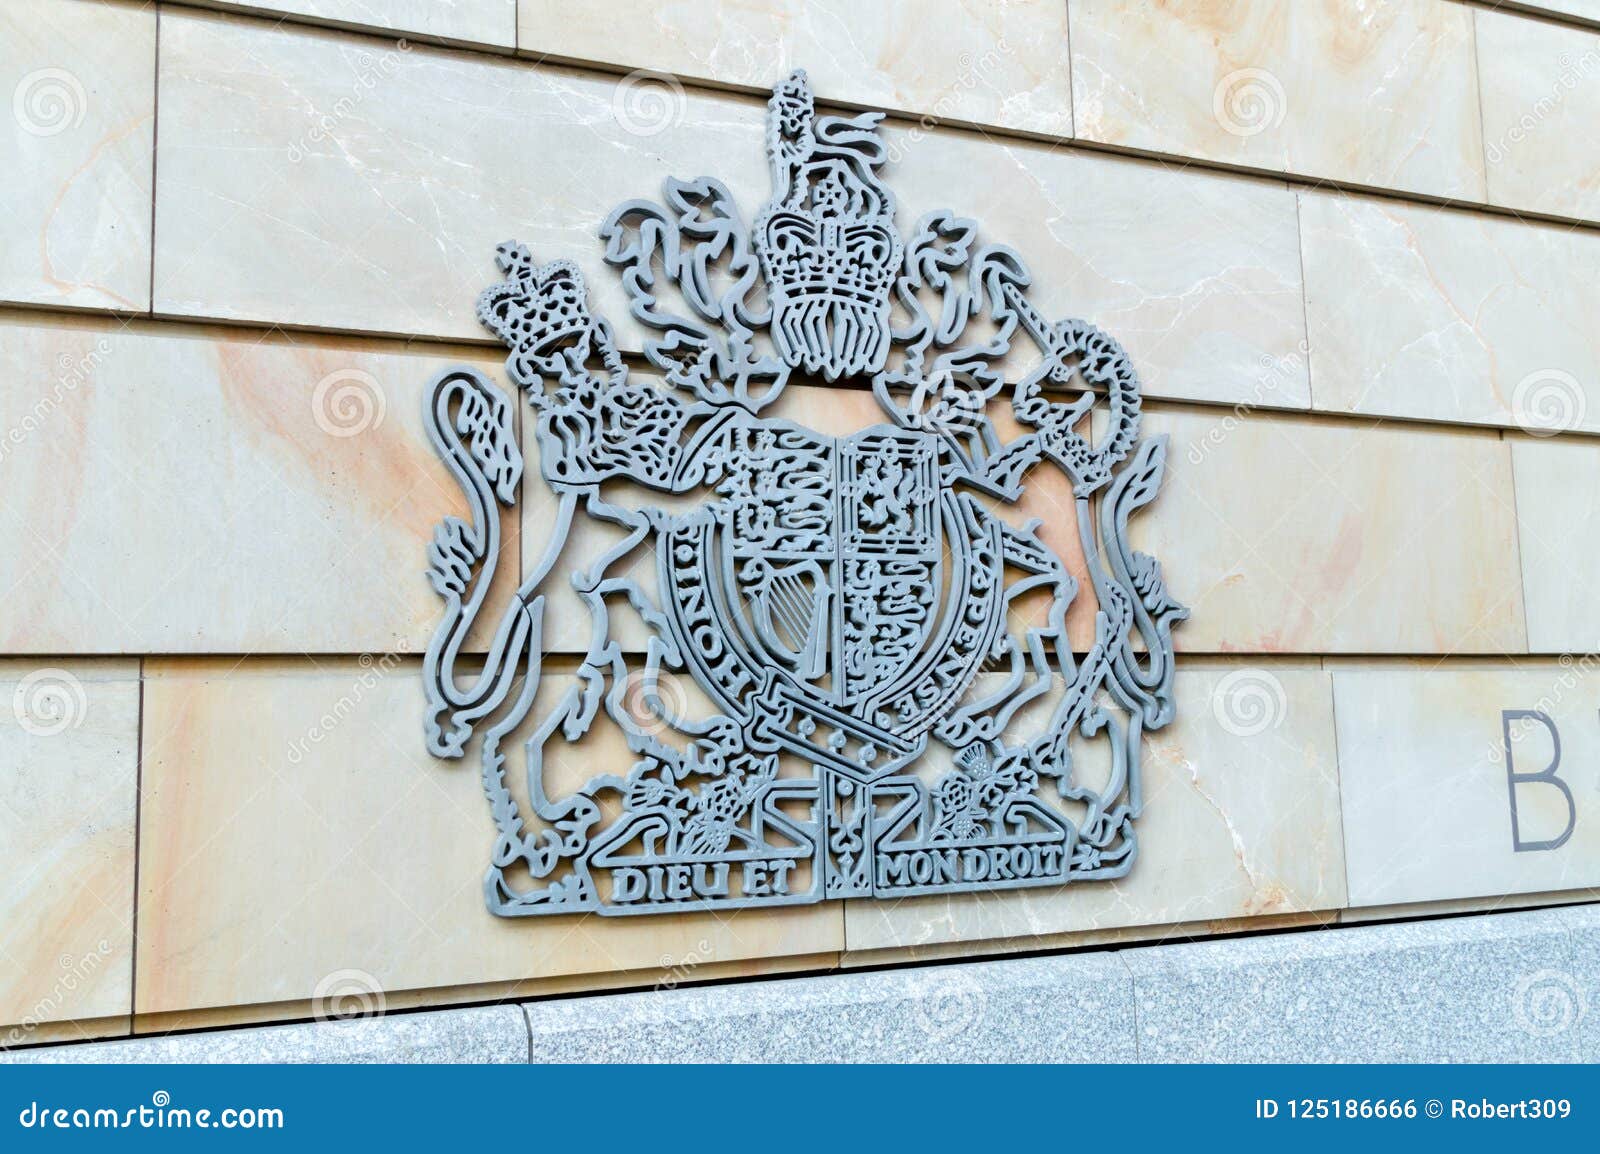 Dieu Et Mon Droit Royal Coat Of Arms Of The United Kingdom Editorial Photo Image Of Crown Britain